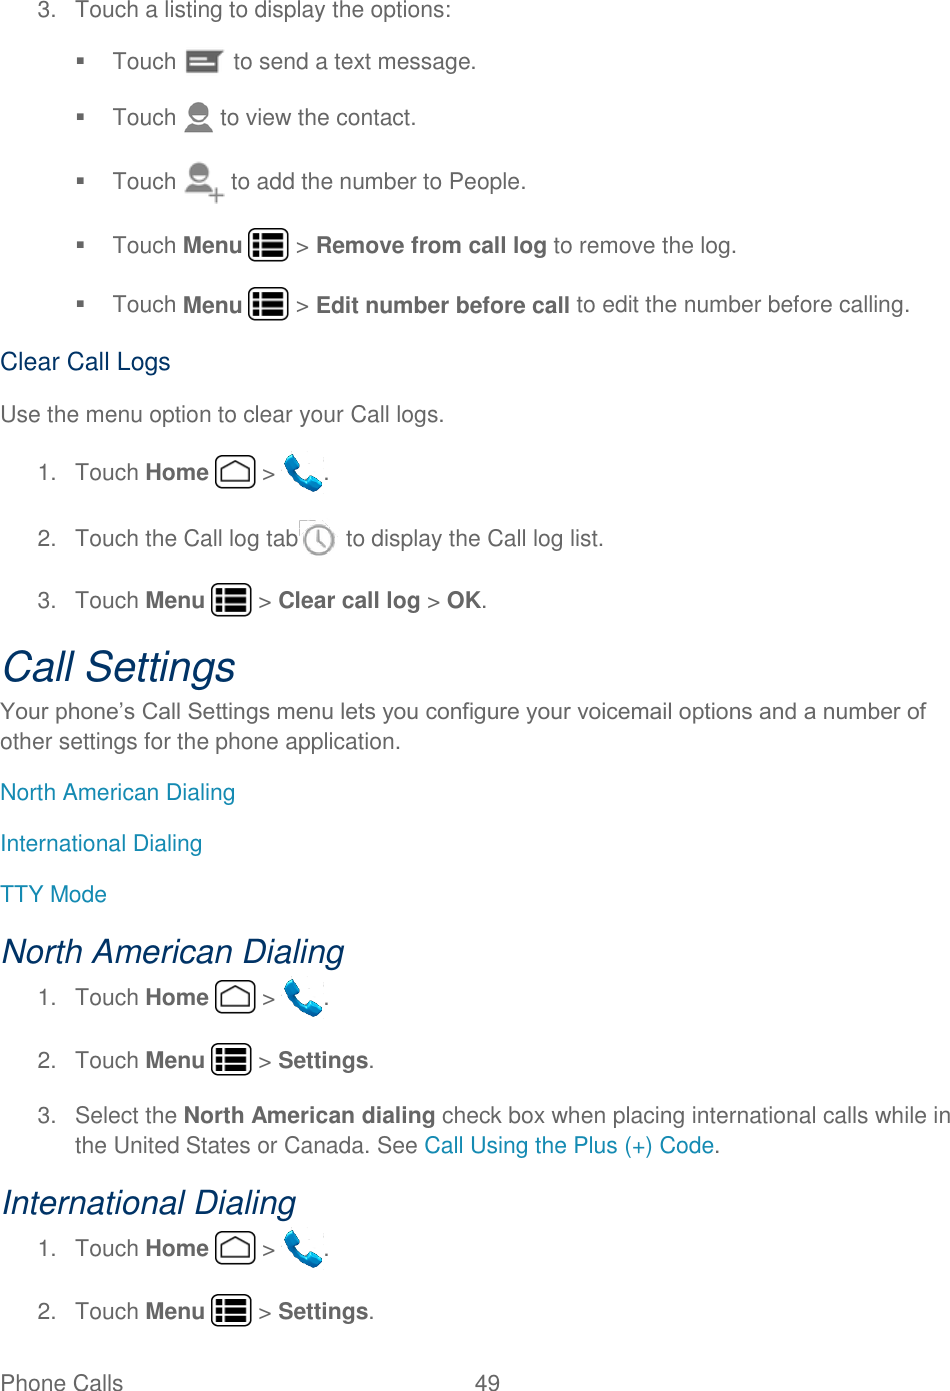 Phone Calls  49   3.  Touch a listing to display the options:   Touch   to send a text message.   Touch   to view the contact.   Touch   to add the number to People.   Touch Menu   &gt; Remove from call log to remove the log.   Touch Menu   &gt; Edit number before call to edit the number before calling. Clear Call Logs Use the menu option to clear your Call logs. 1.  Touch Home   &gt;  . 2.  Touch the Call log tab  to display the Call log list. 3.  Touch Menu   &gt; Clear call log &gt; OK. Call Settings Your phone’s Call Settings menu lets you configure your voicemail options and a number of other settings for the phone application. North American Dialing International Dialing TTY Mode North American Dialing 1.  Touch Home   &gt;  . 2.  Touch Menu   &gt; Settings. 3.  Select the North American dialing check box when placing international calls while in the United States or Canada. See Call Using the Plus (+) Code. International Dialing 1.  Touch Home   &gt;  . 2.  Touch Menu   &gt; Settings. 